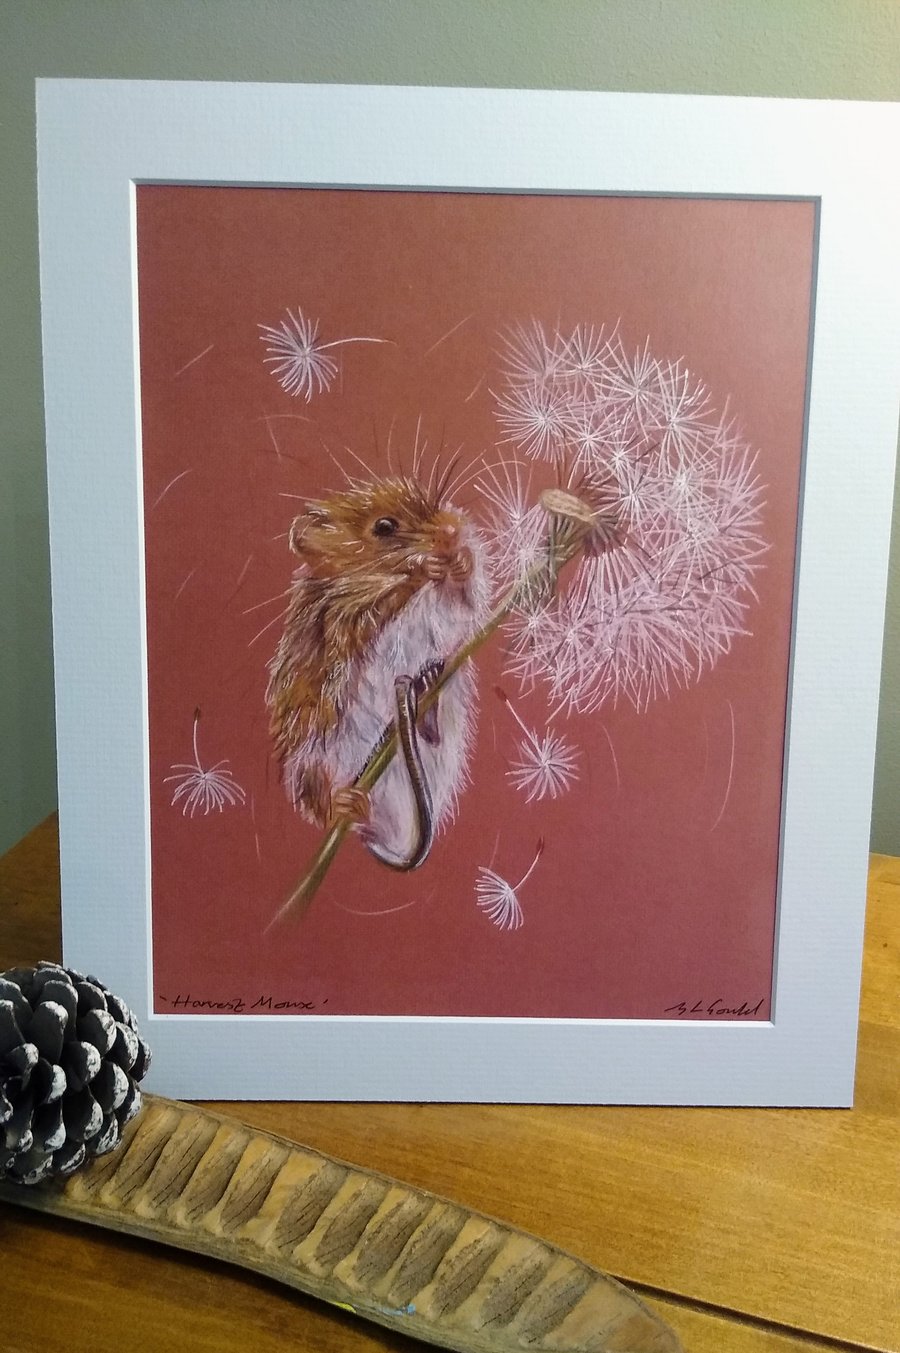 A quality signed print of an original drawing of a Harvest Mouse.